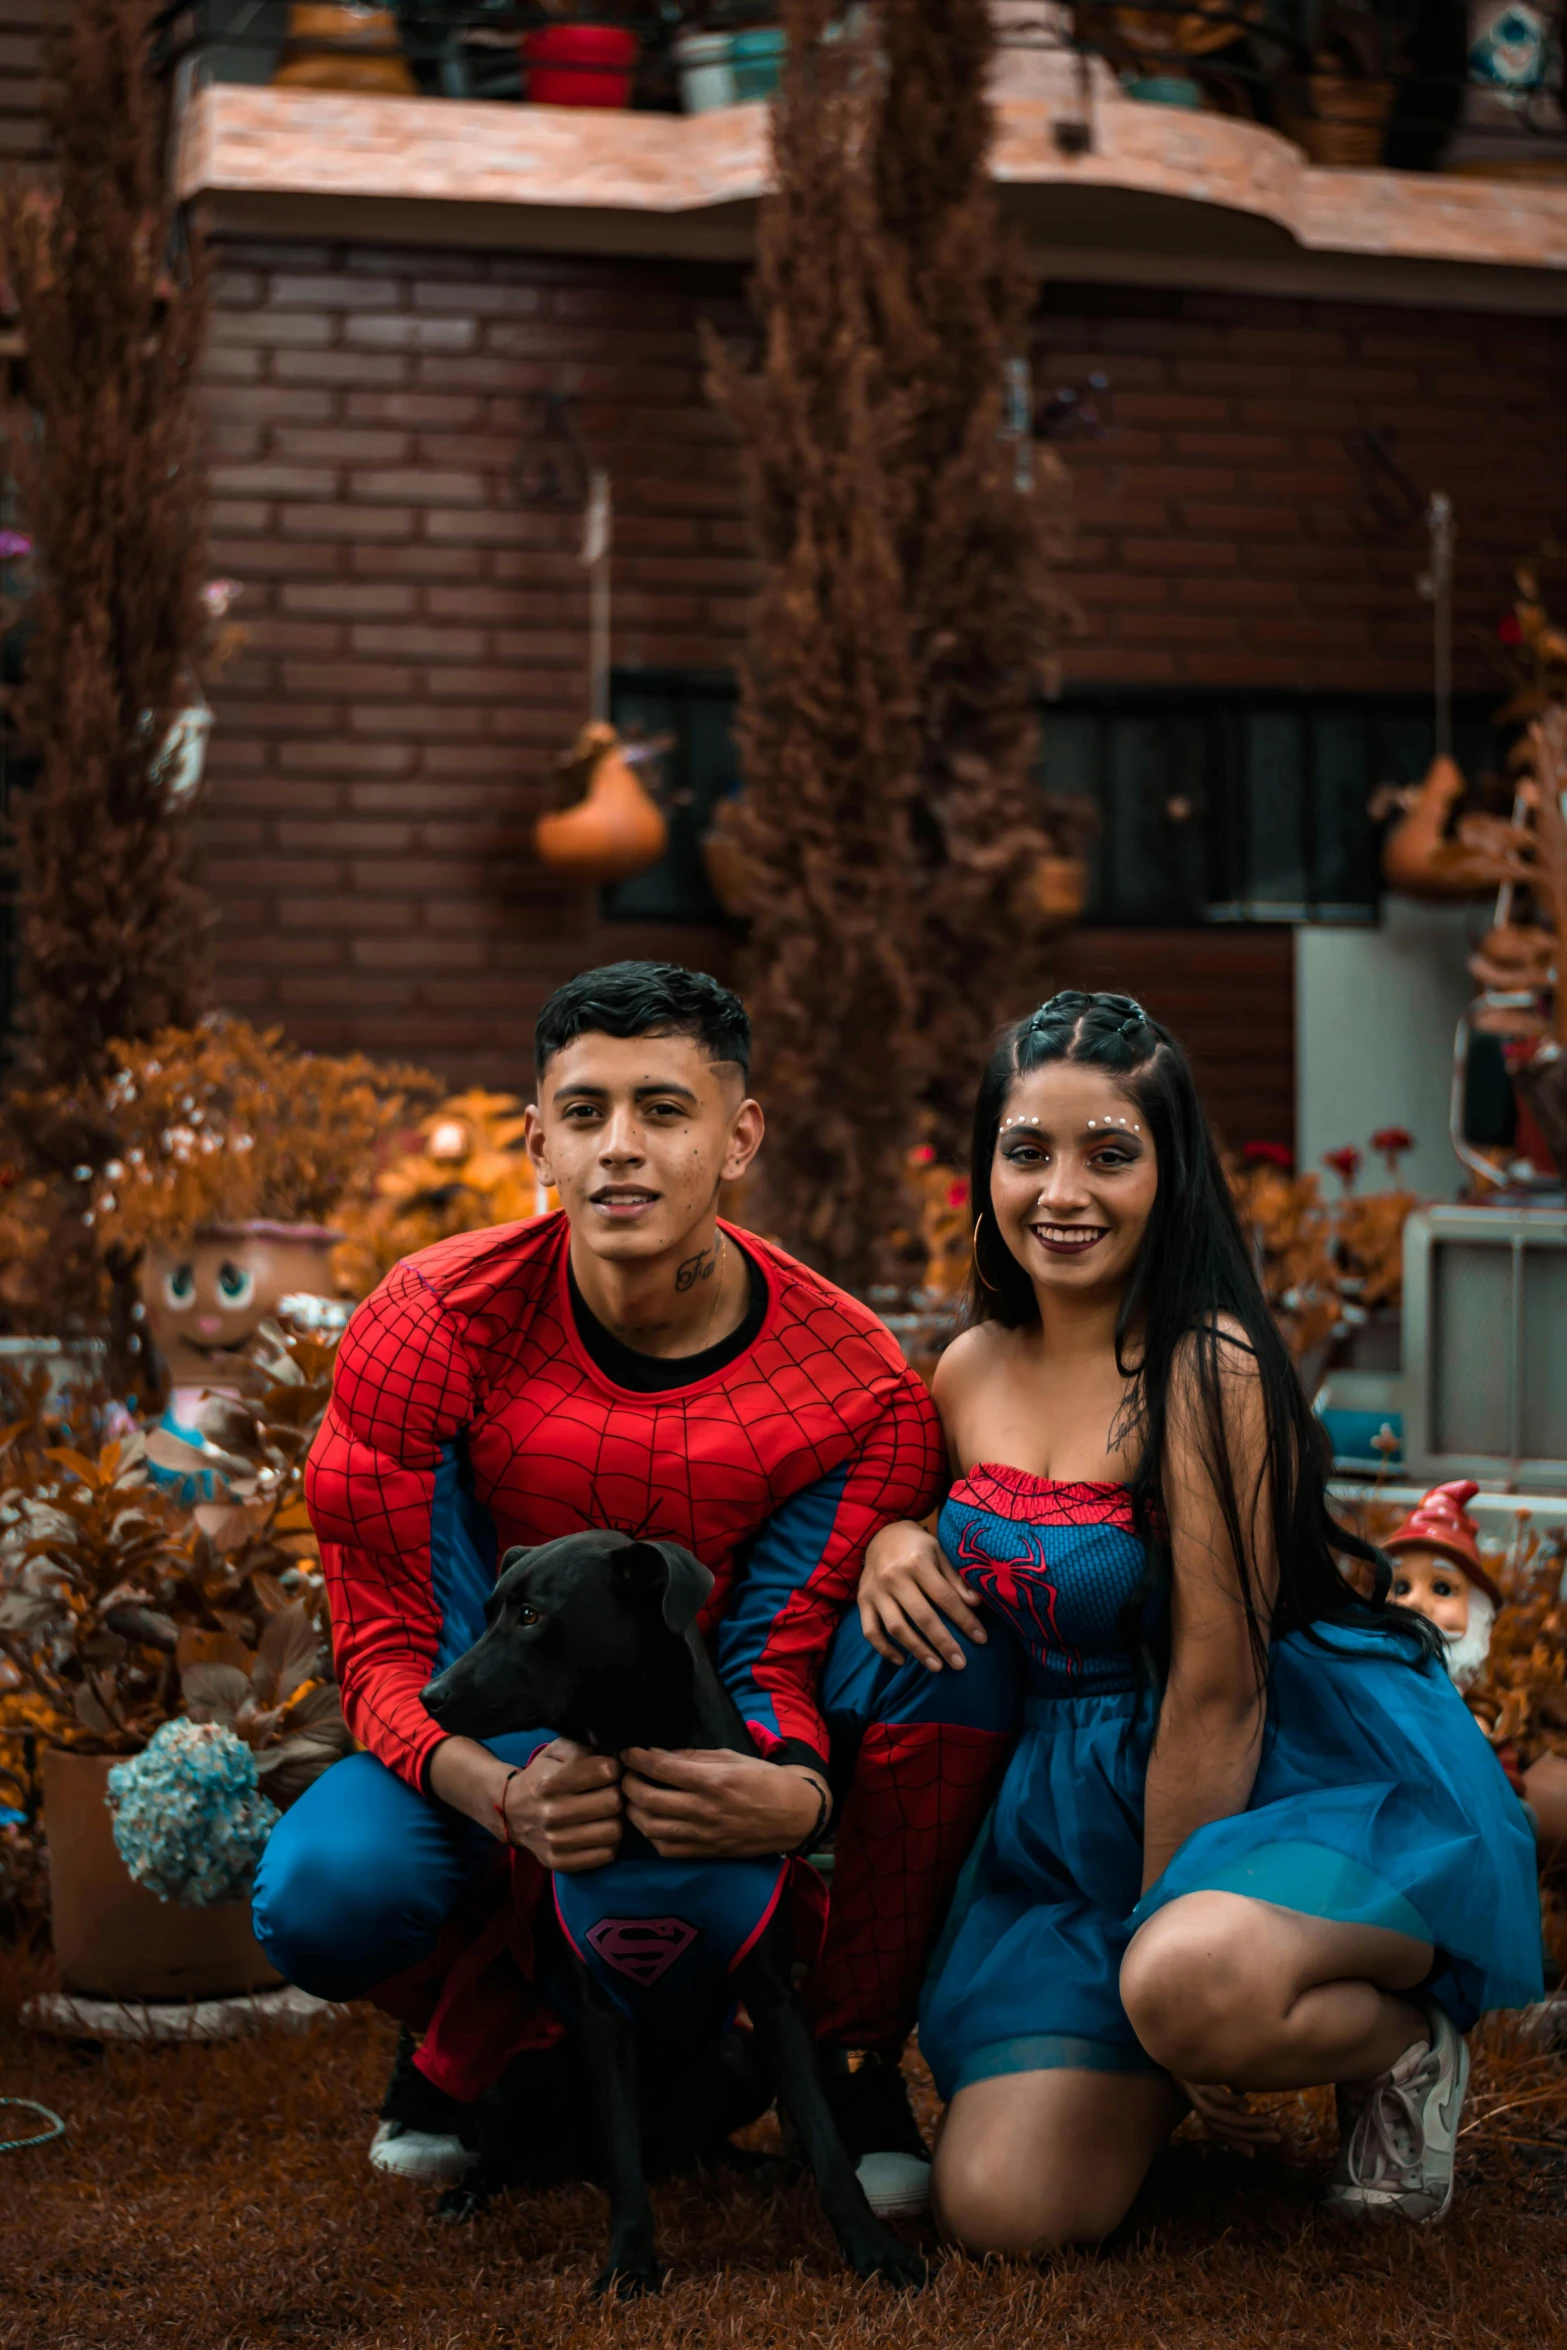 a young couple in spiderman costume standing next to a dog